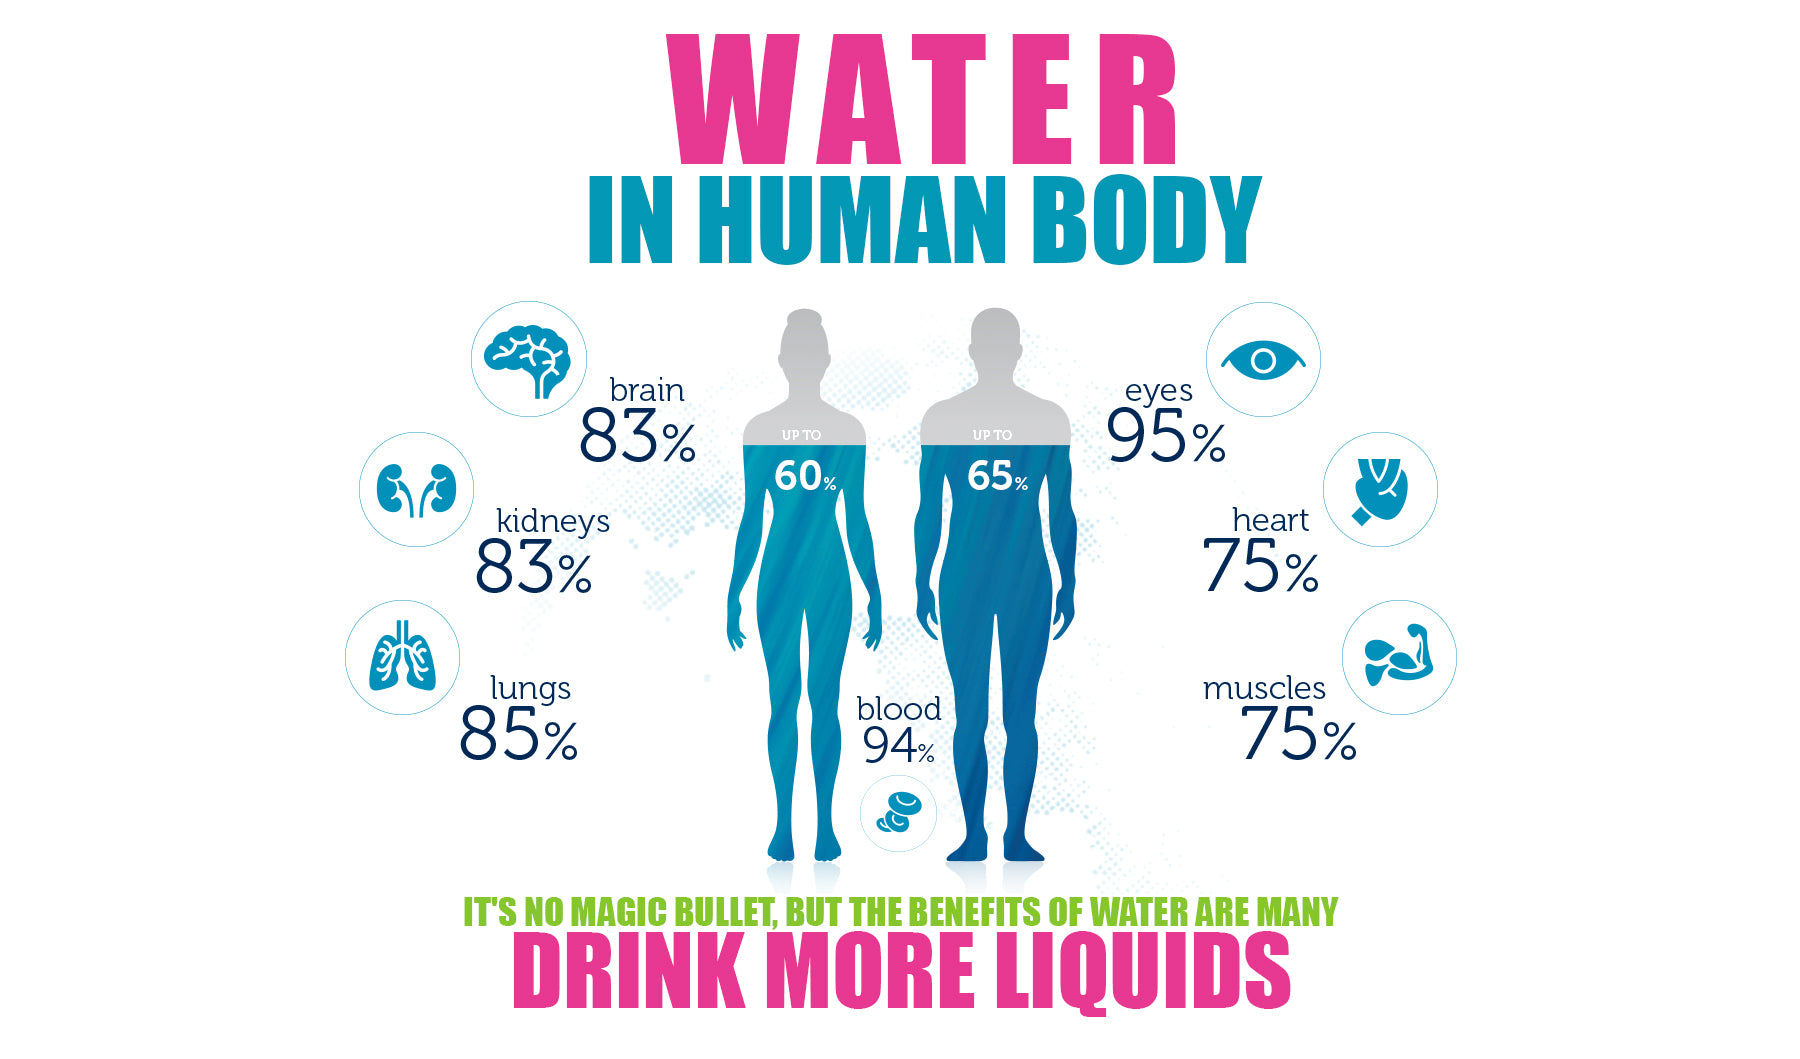 6 Reasons to Drink more Liquids